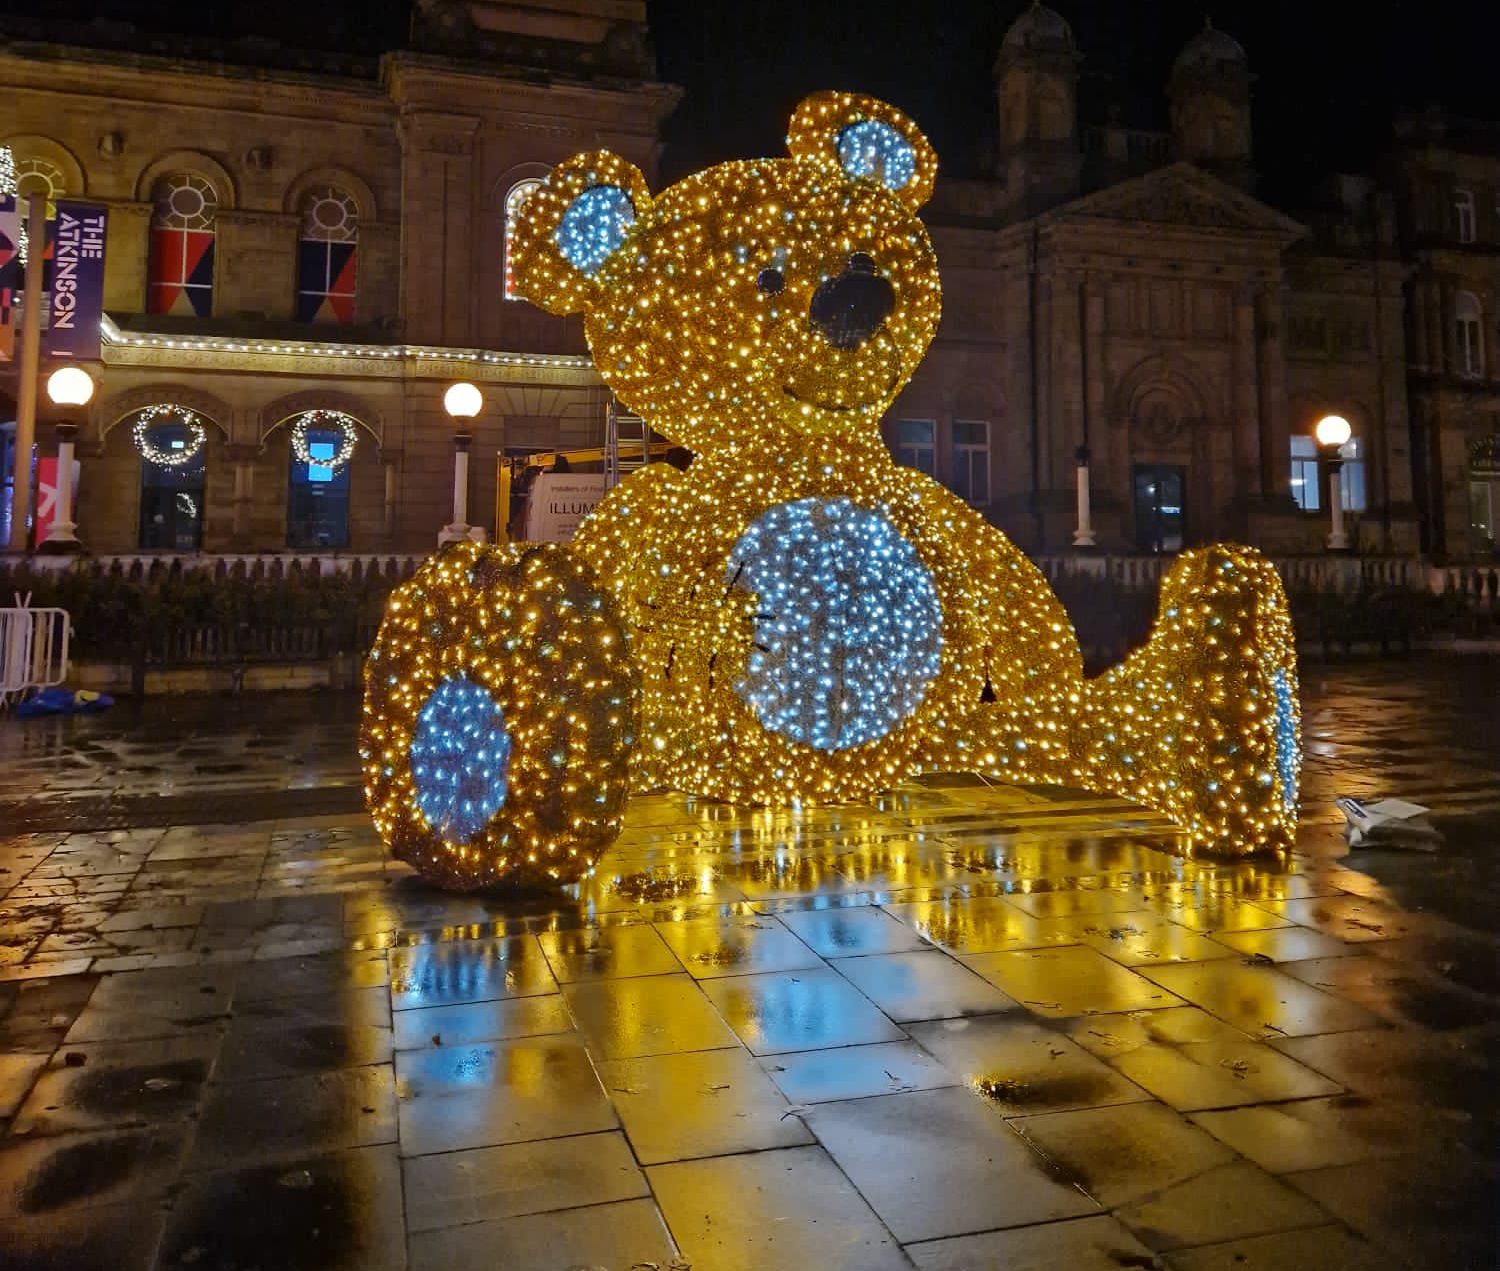 Southport BID has installed a large illuminated bear and reindeer in the Town Hall Gardens in Southport 